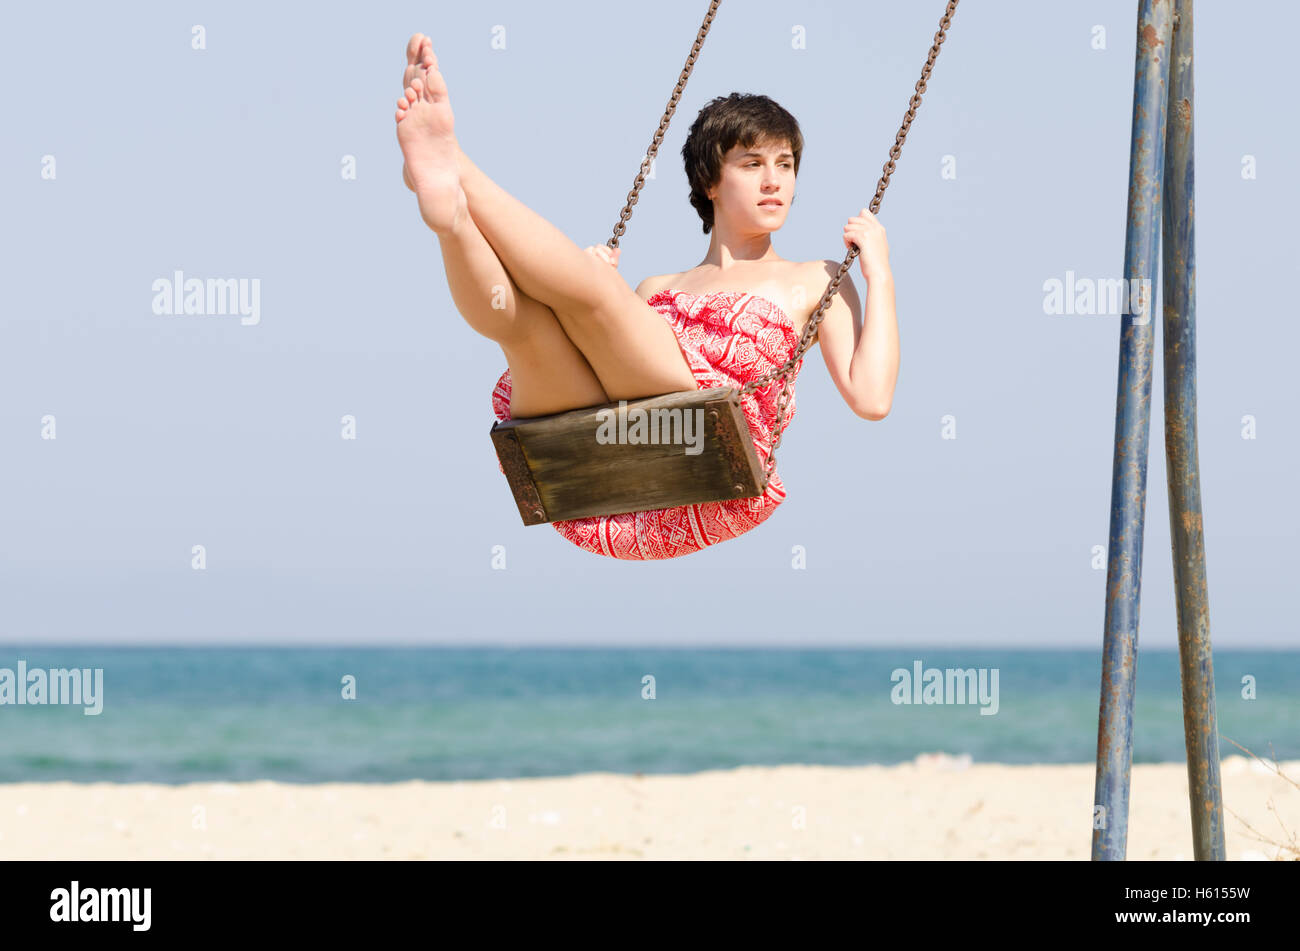 Young woman in a red dress swing by the beach Stock Photo